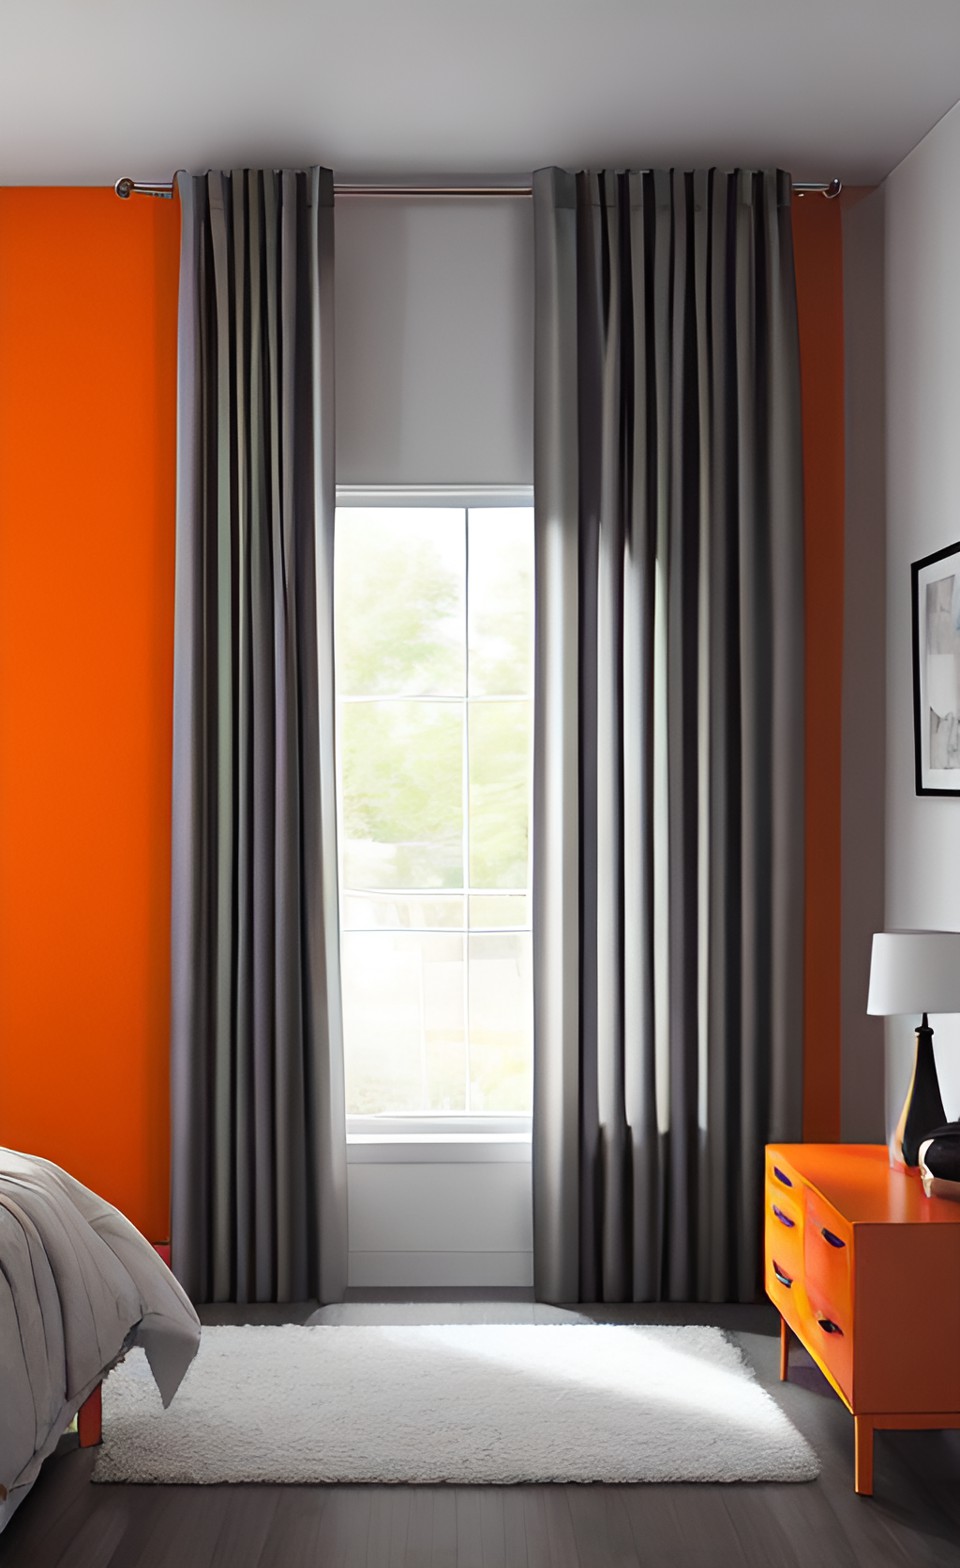 Charcoal Gray Curtains for Orange Walls